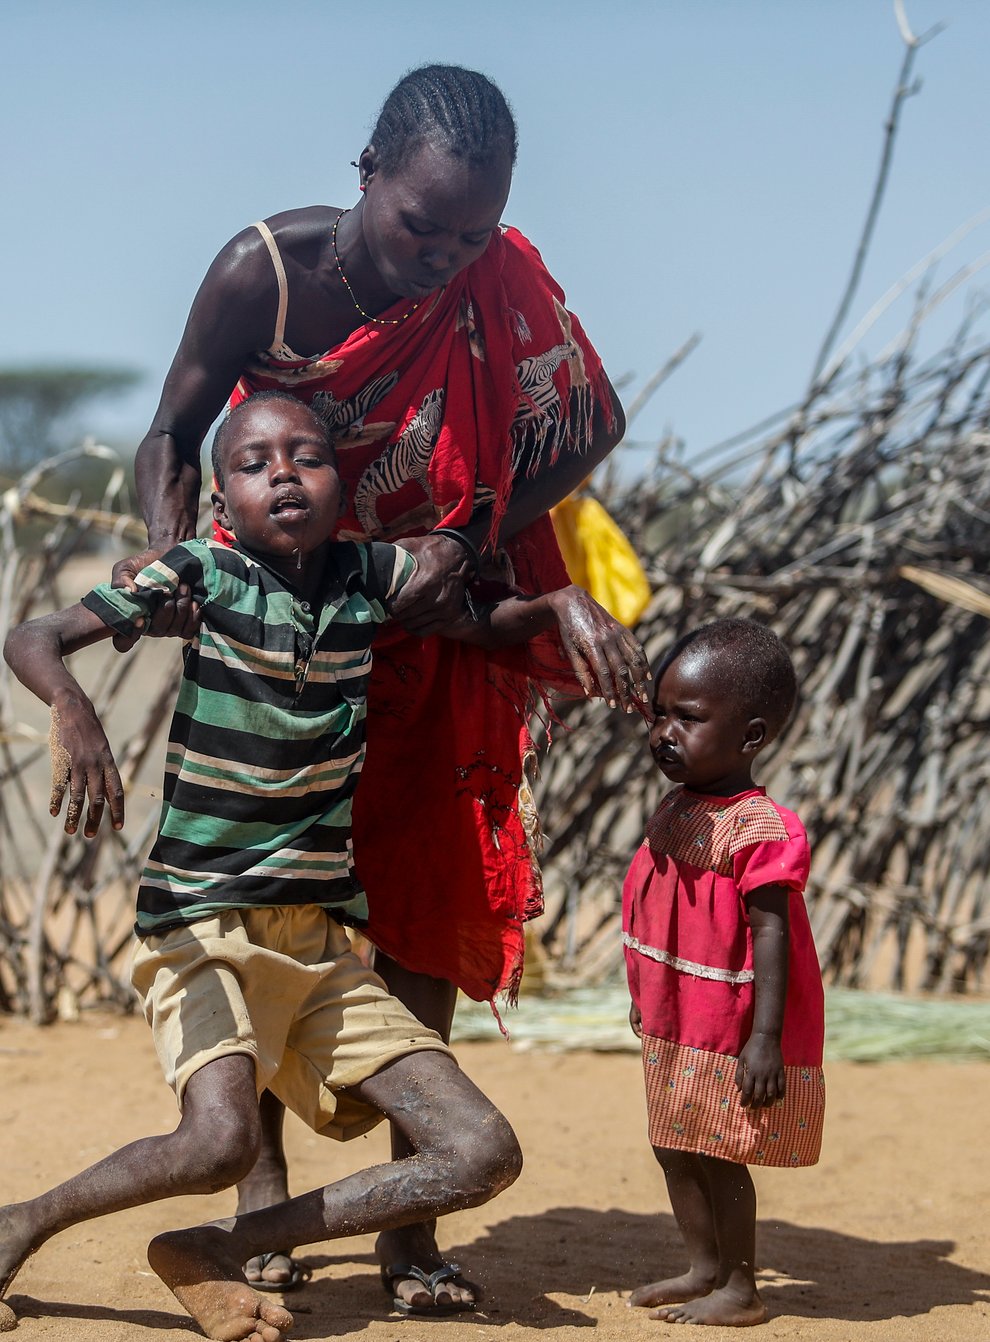 A mother helps her malnourished son stand after he collapsed near their hut in the village of Lomoputh in northern Kenya on Thursday May 12 2022 (Brian Inganga/AP)